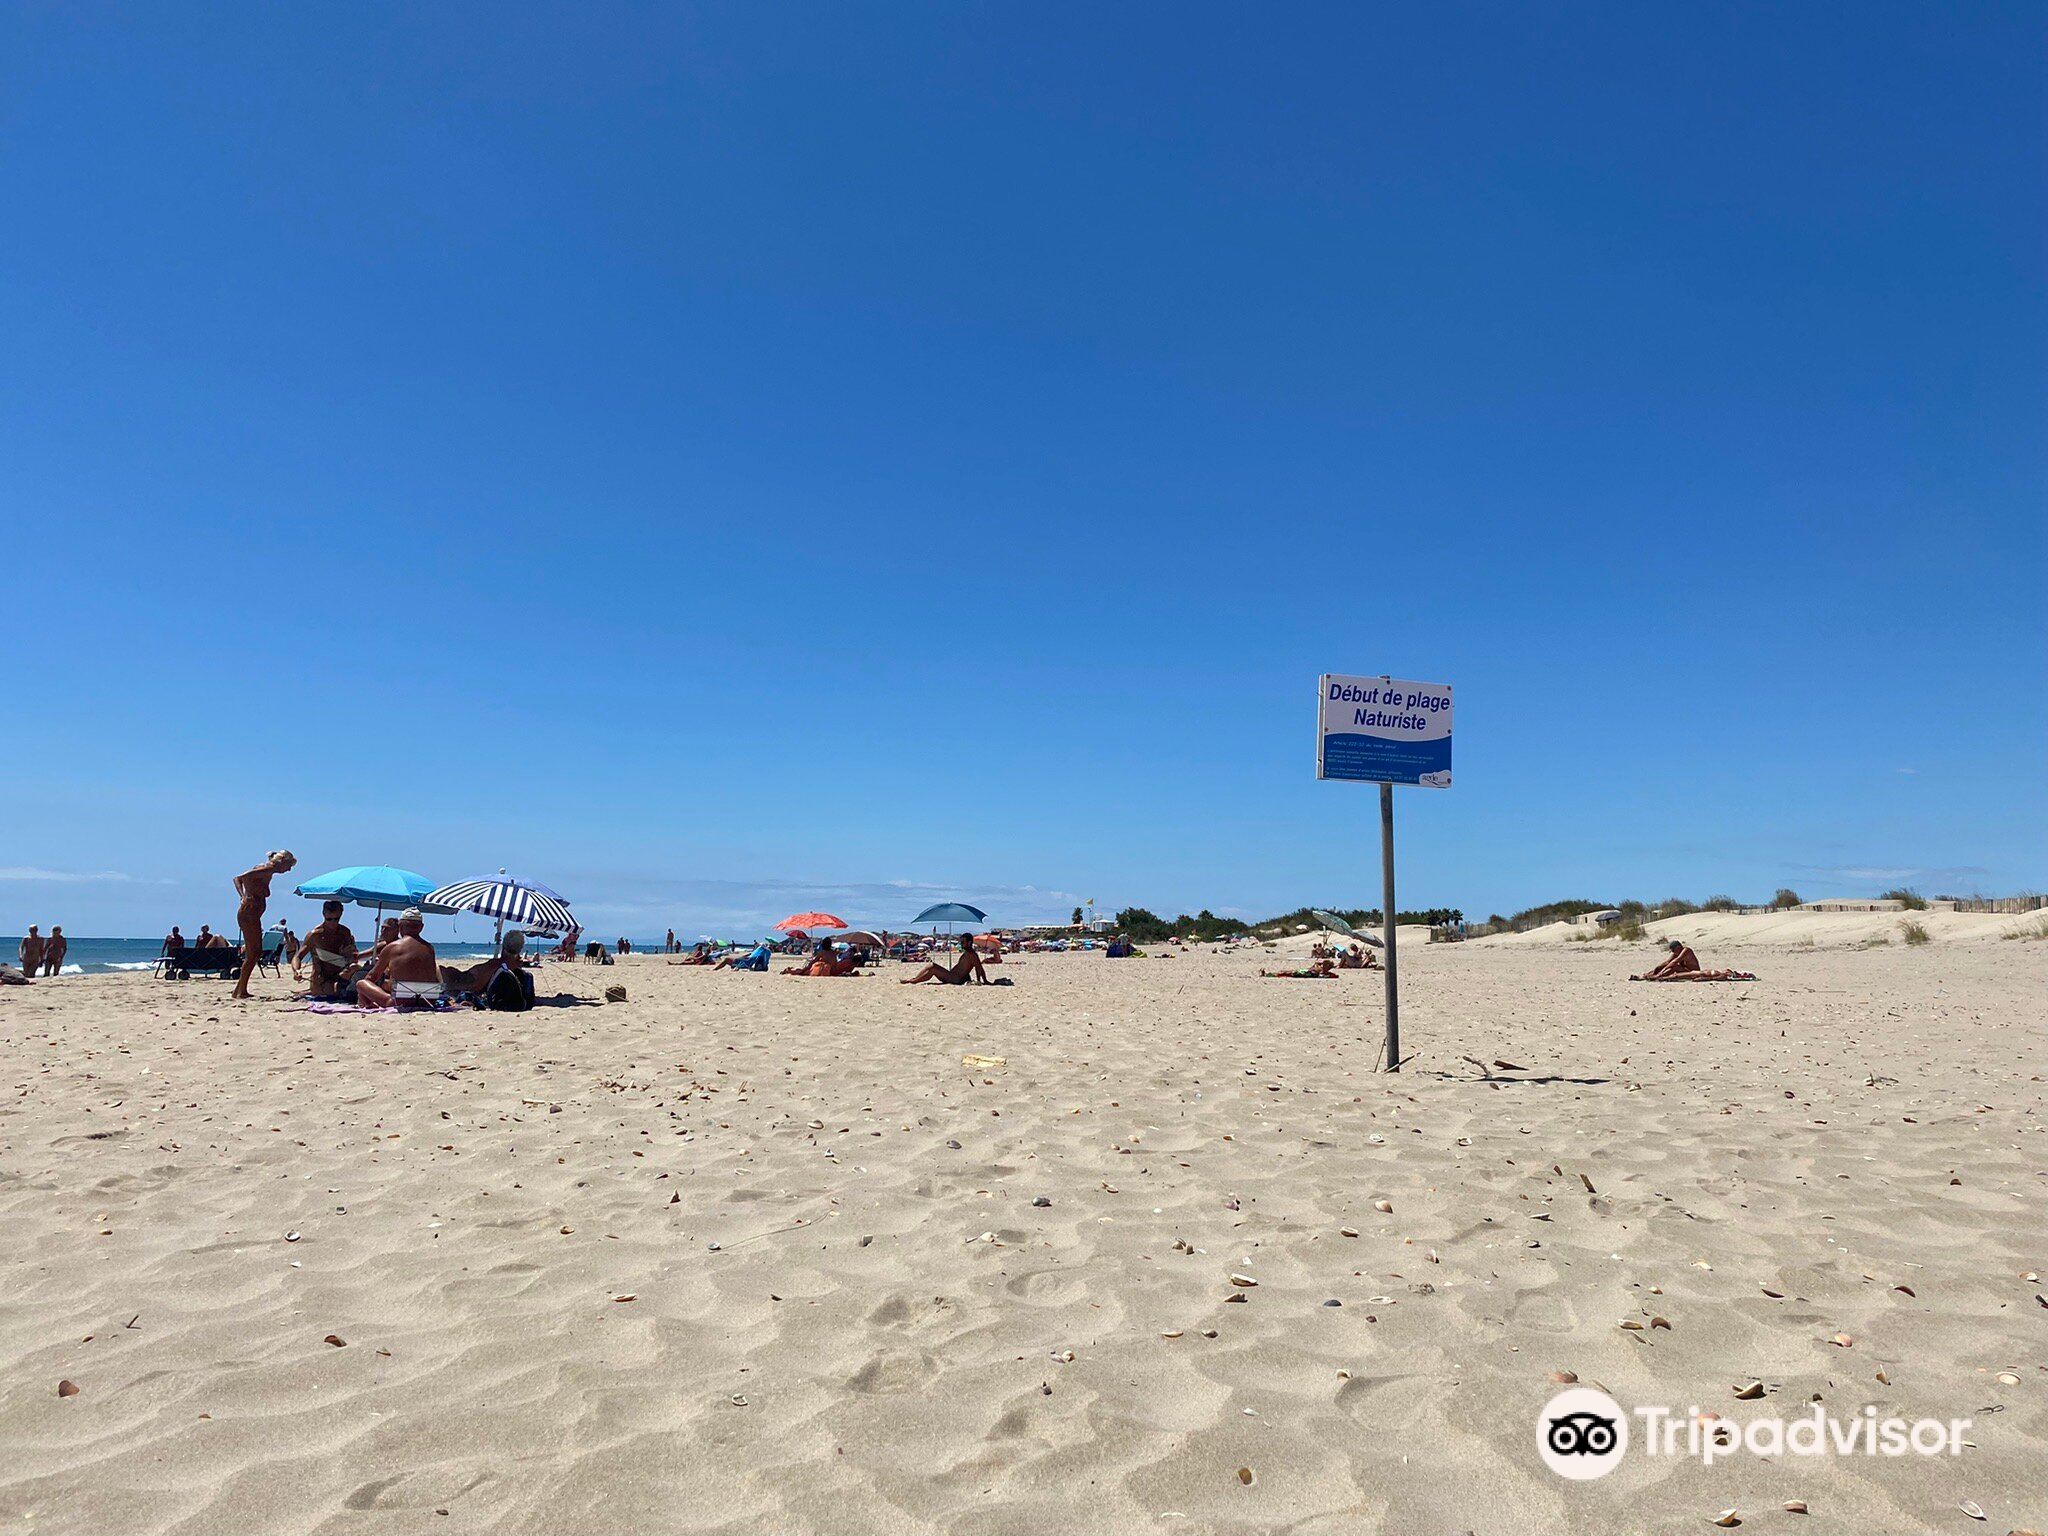 Latest travel itineraries for Plage Naturiste in October (updated in 2023), Plage Naturiste reviews, Plage Naturiste address and opening hours, popular attractions, hotels, and restaurants near Plage Naturiste